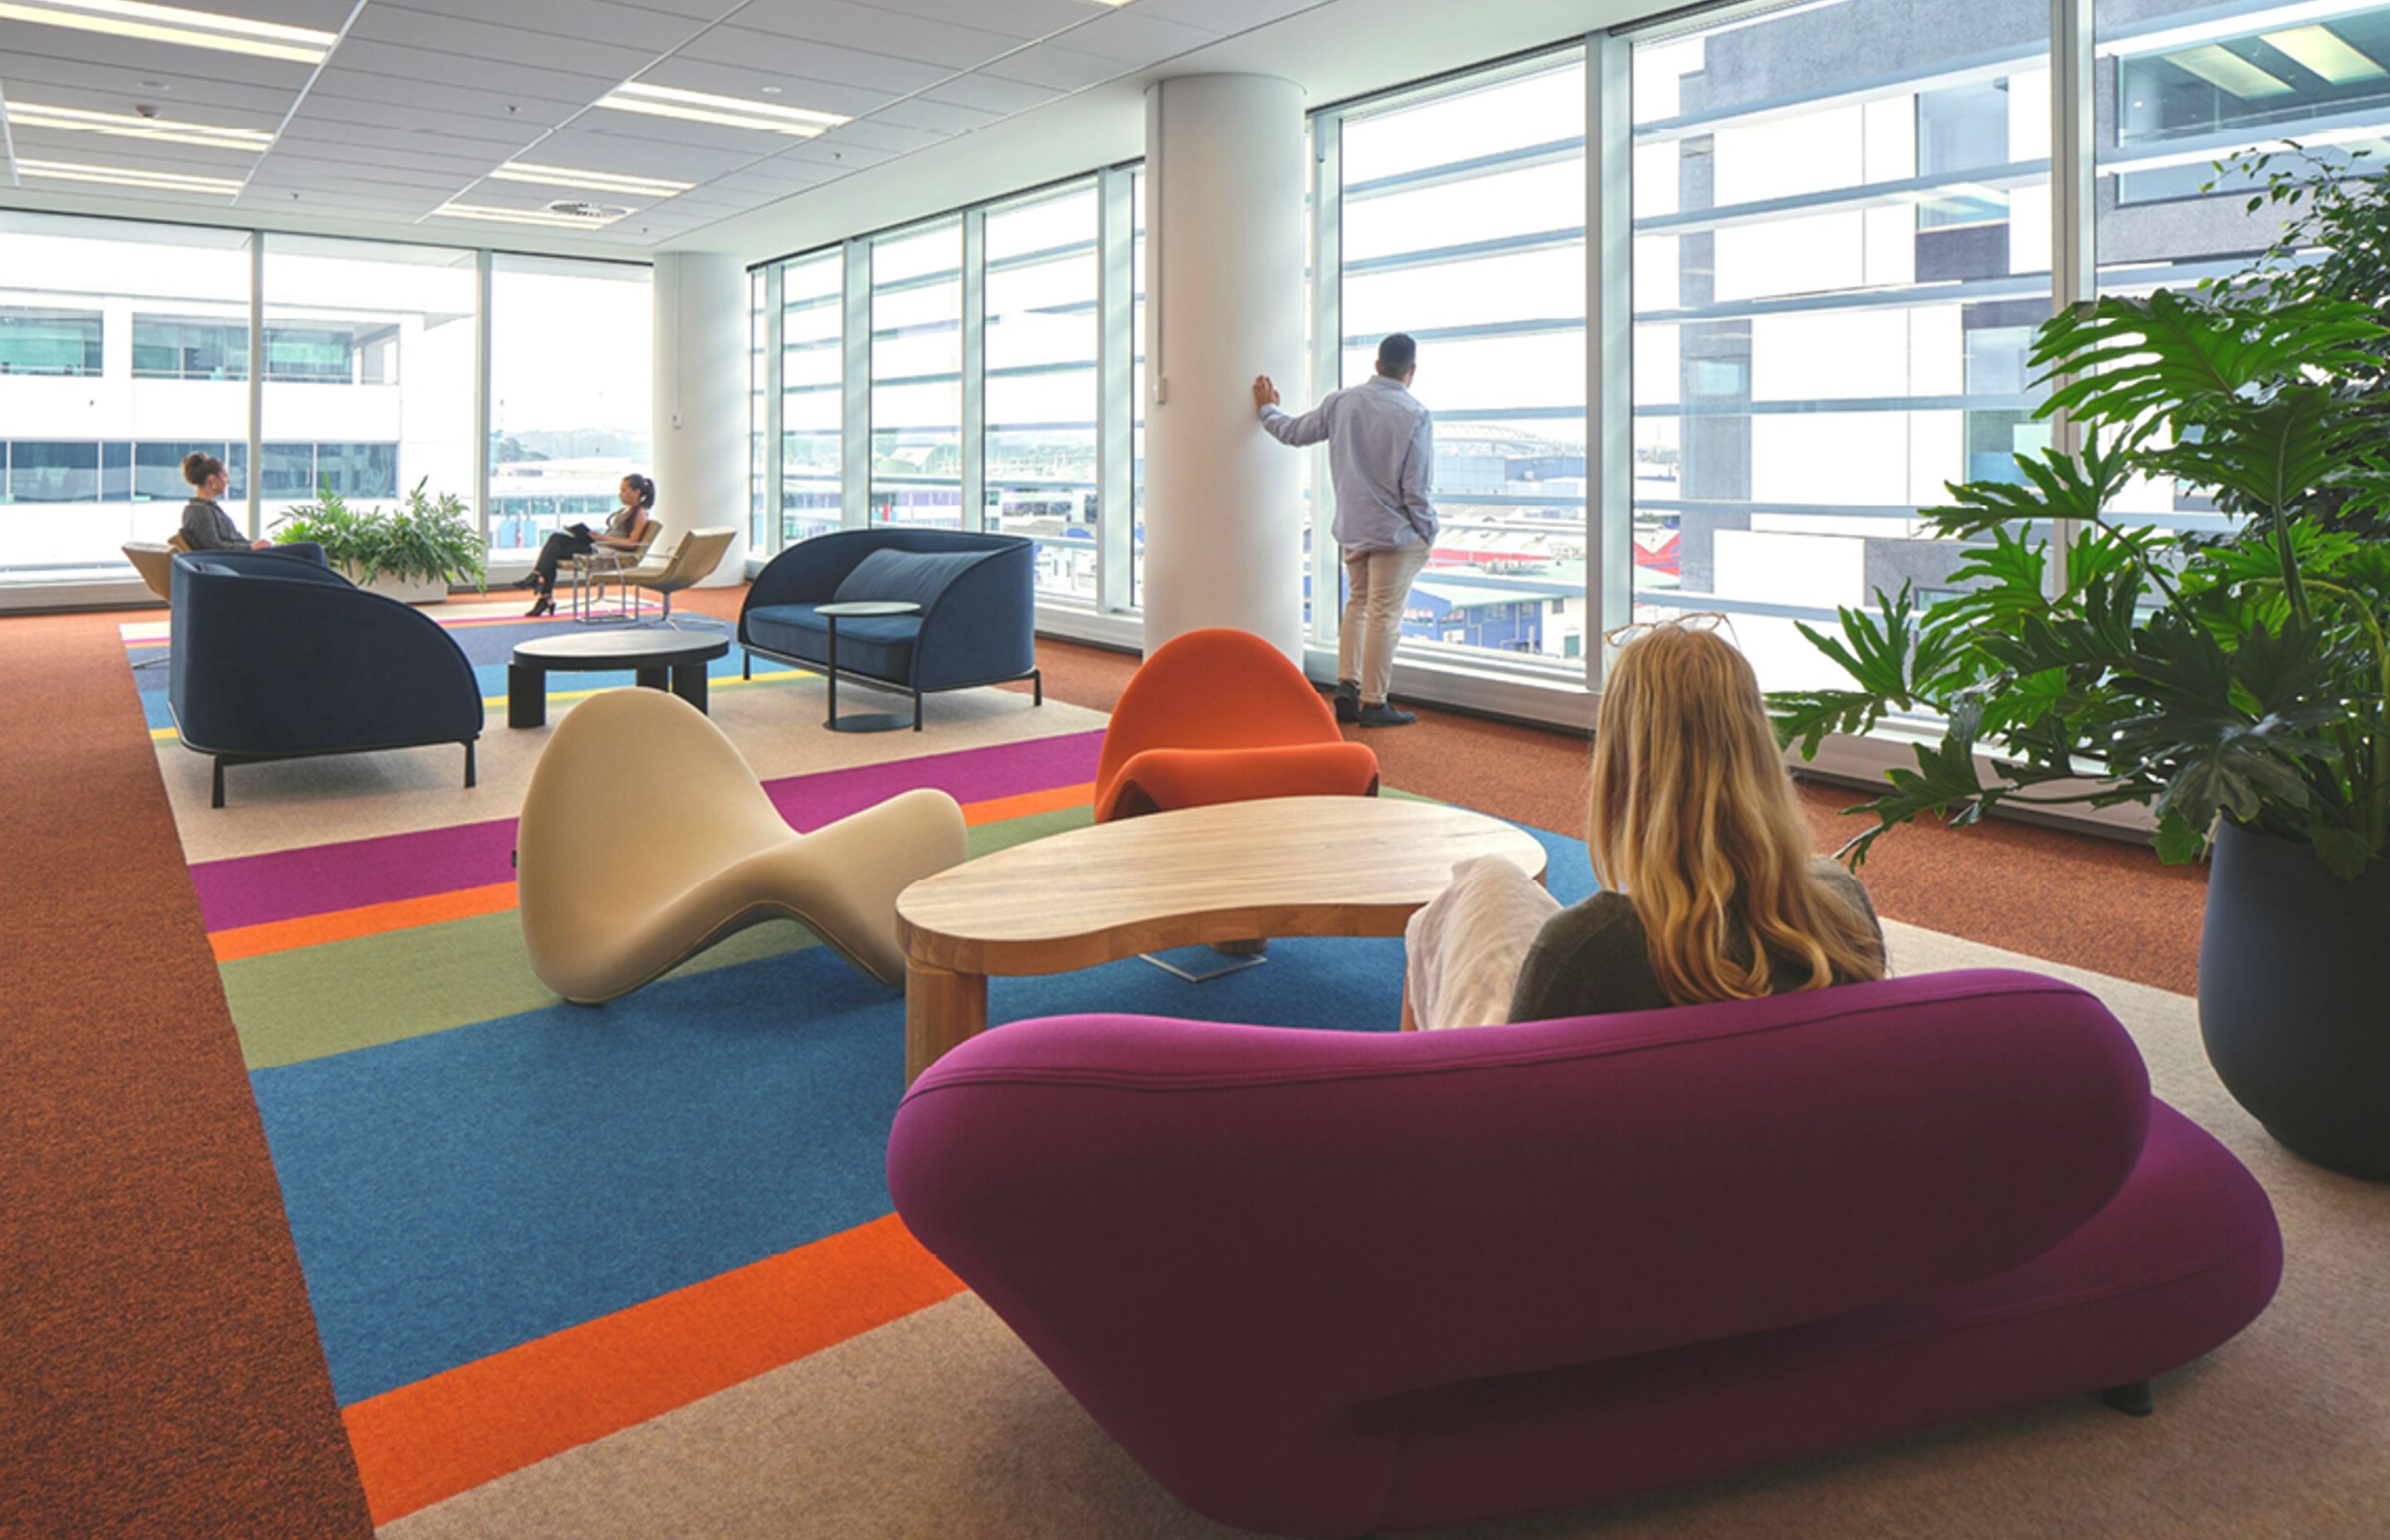 A mix of retro and modern furniture, coupled with a daring use of colour from Heritage Carpets, creates an office environment that’s interesting, surprising, fun and full of personality—reflective of Trade Me’s youthful, quirky reputation.